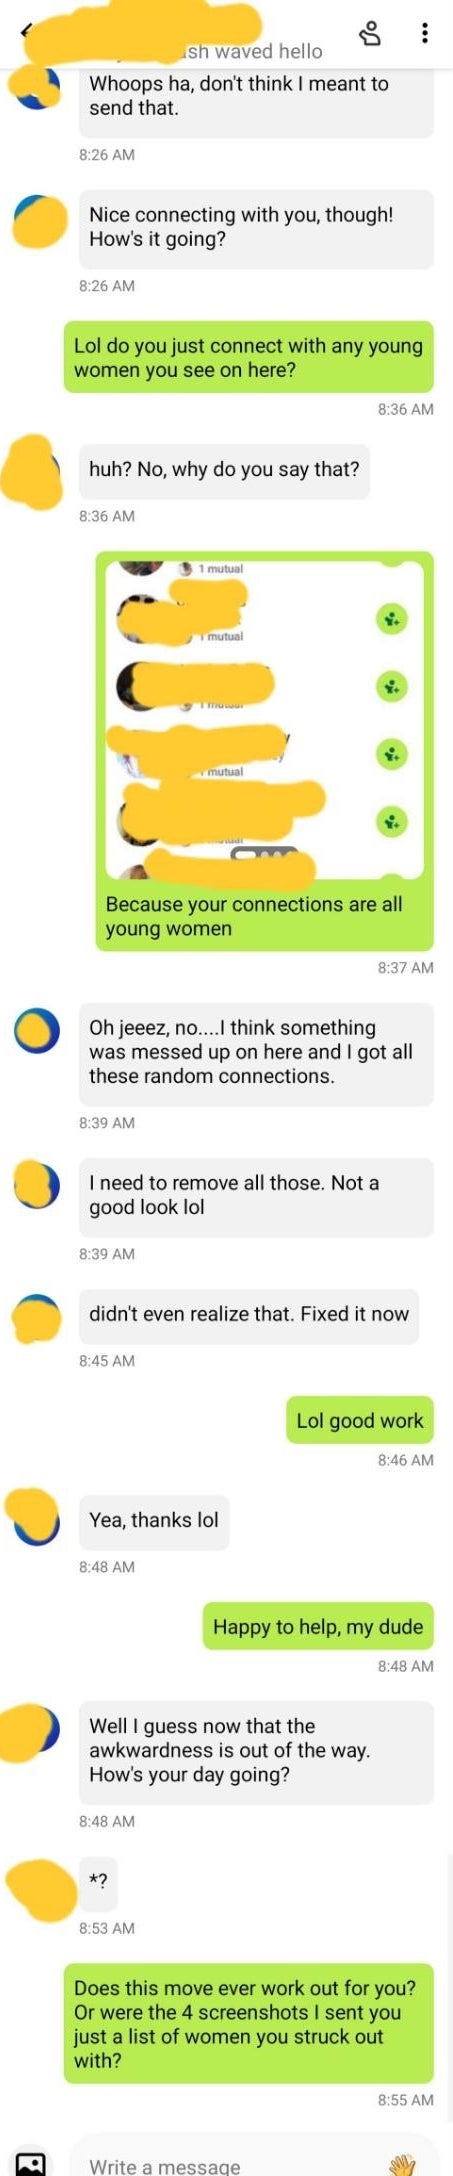 Person claims their all young-women connections are just random coincidences